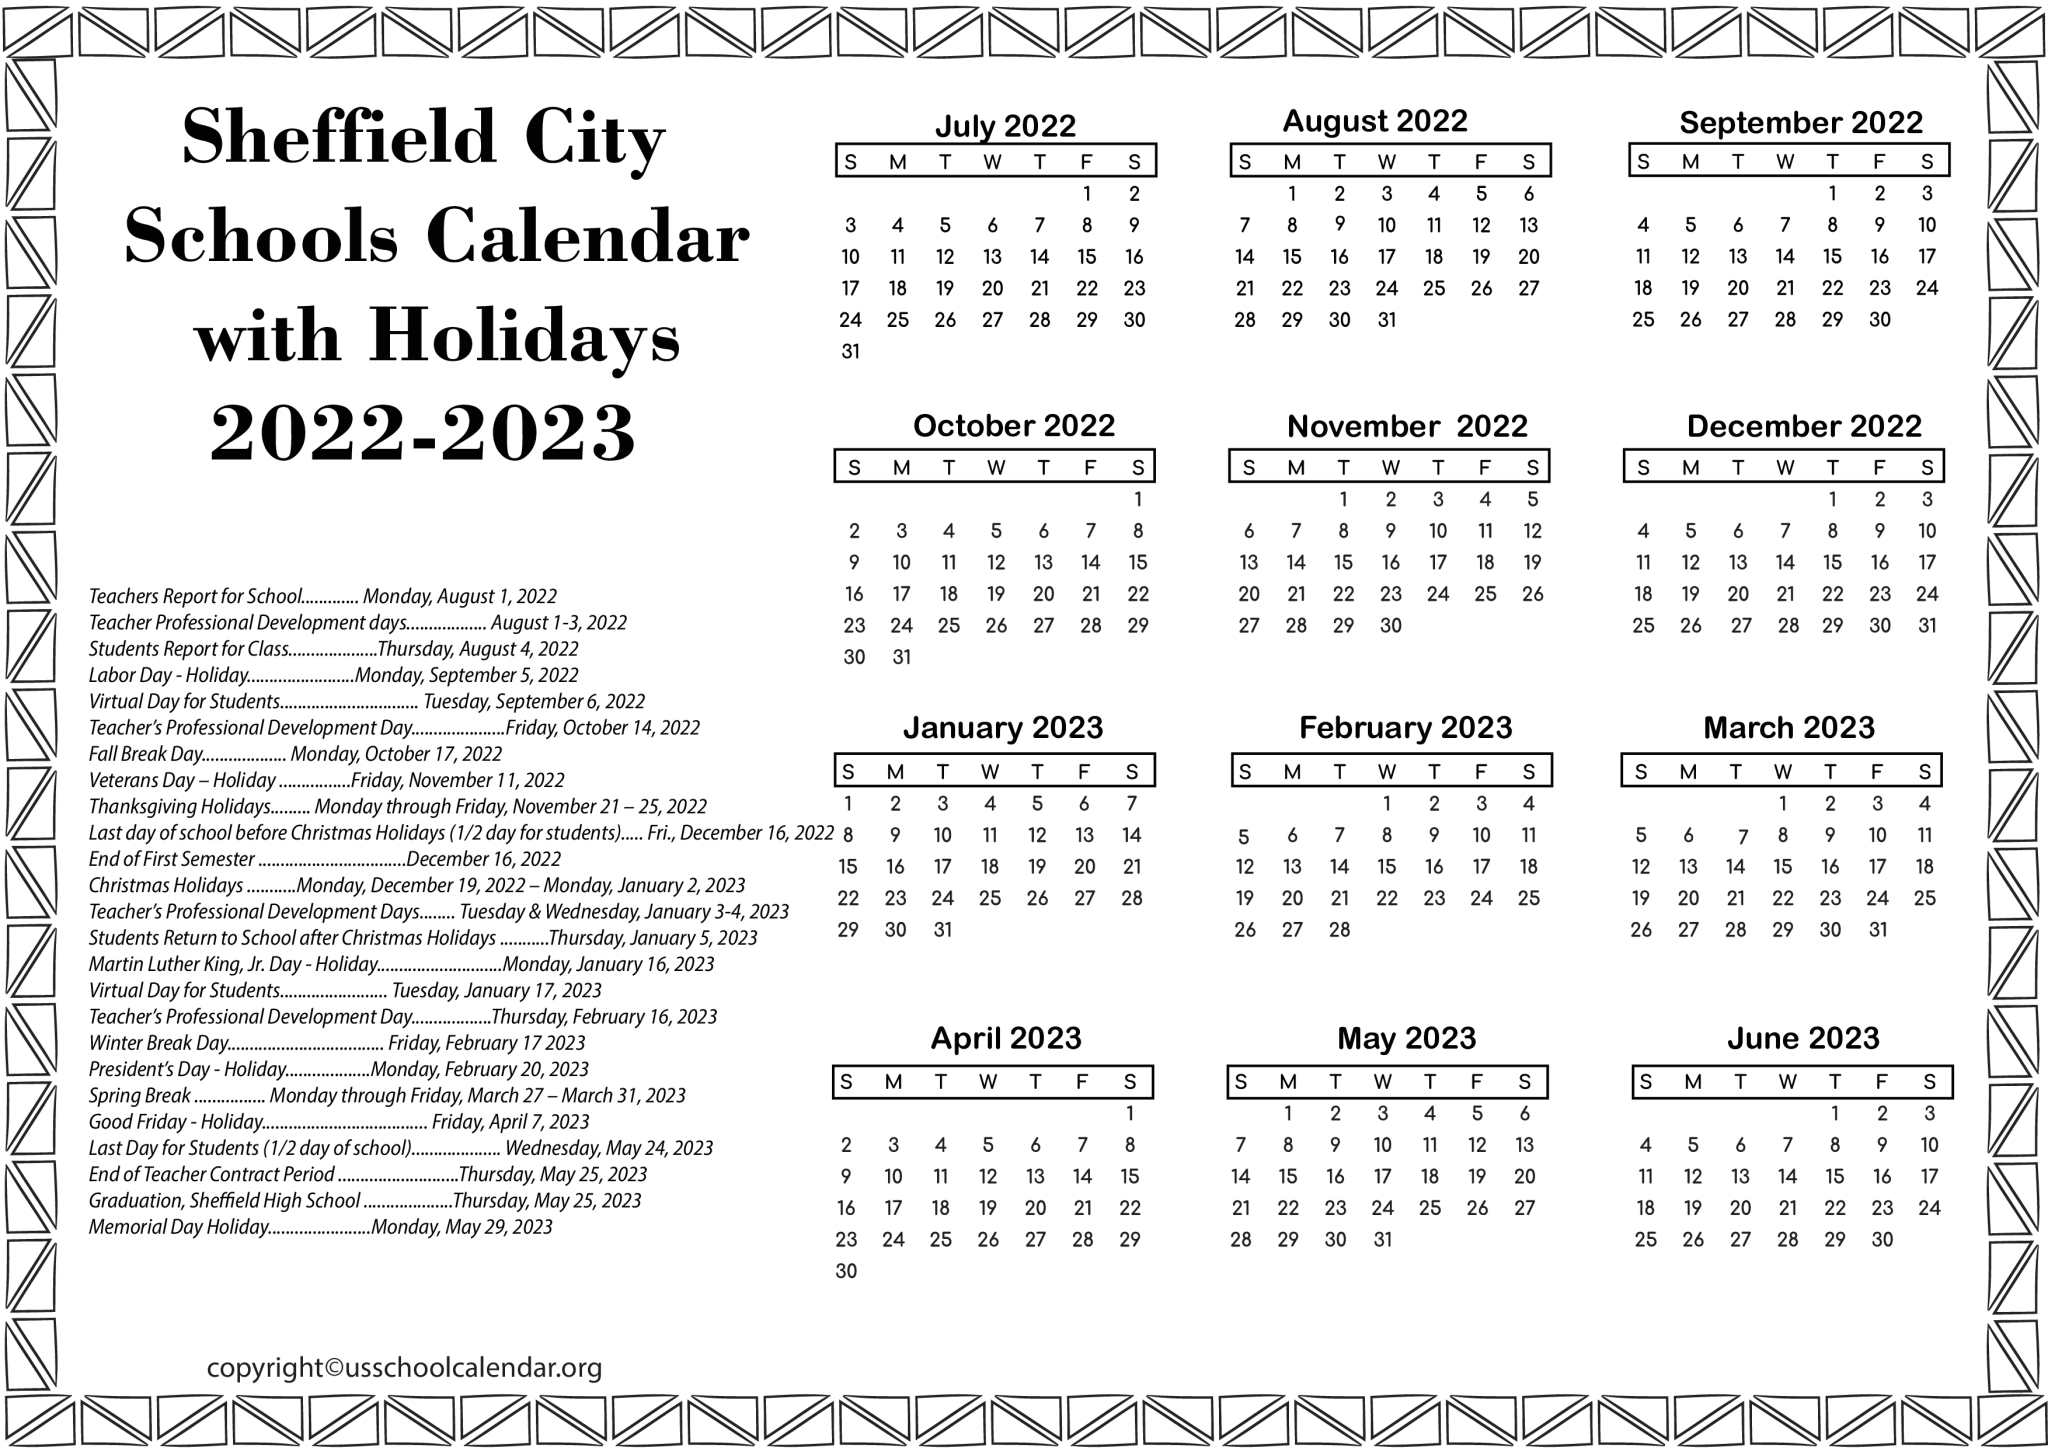 SCS Sheffield City Schools Calendar with Holidays 2023